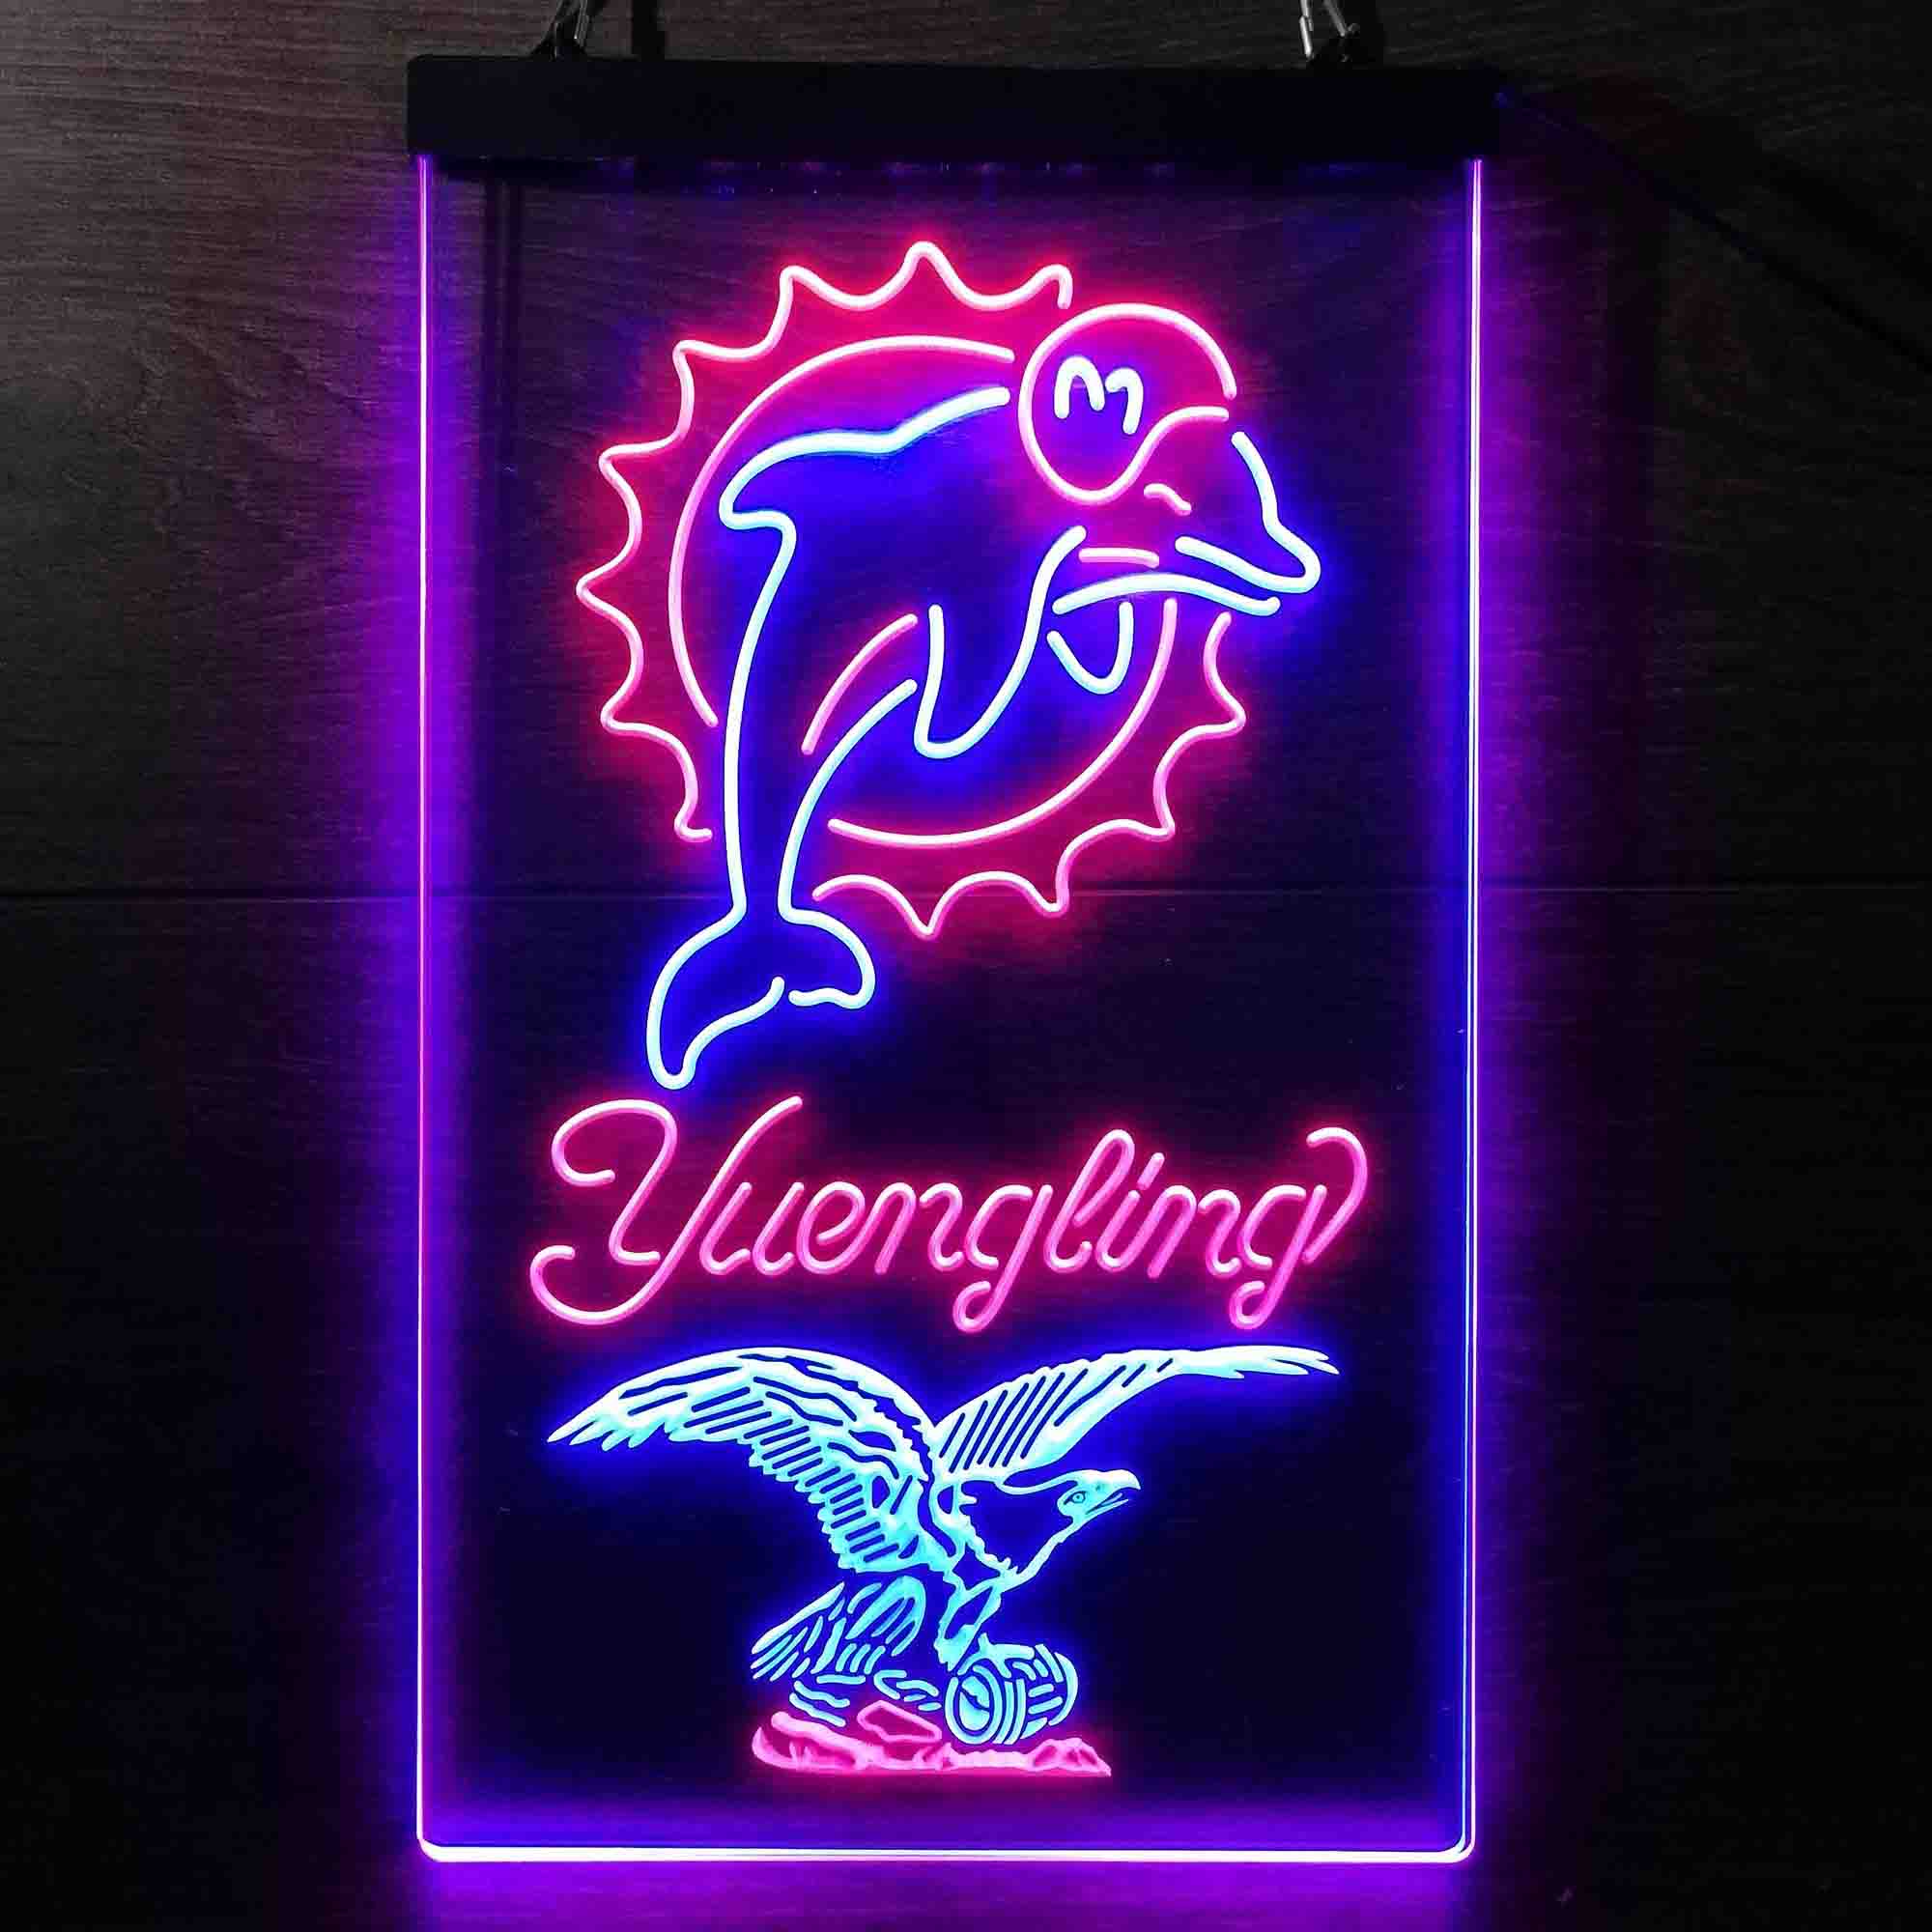 Yuengling Bar Miami Dolphins Est. 1966 Neon-Like LED Sign